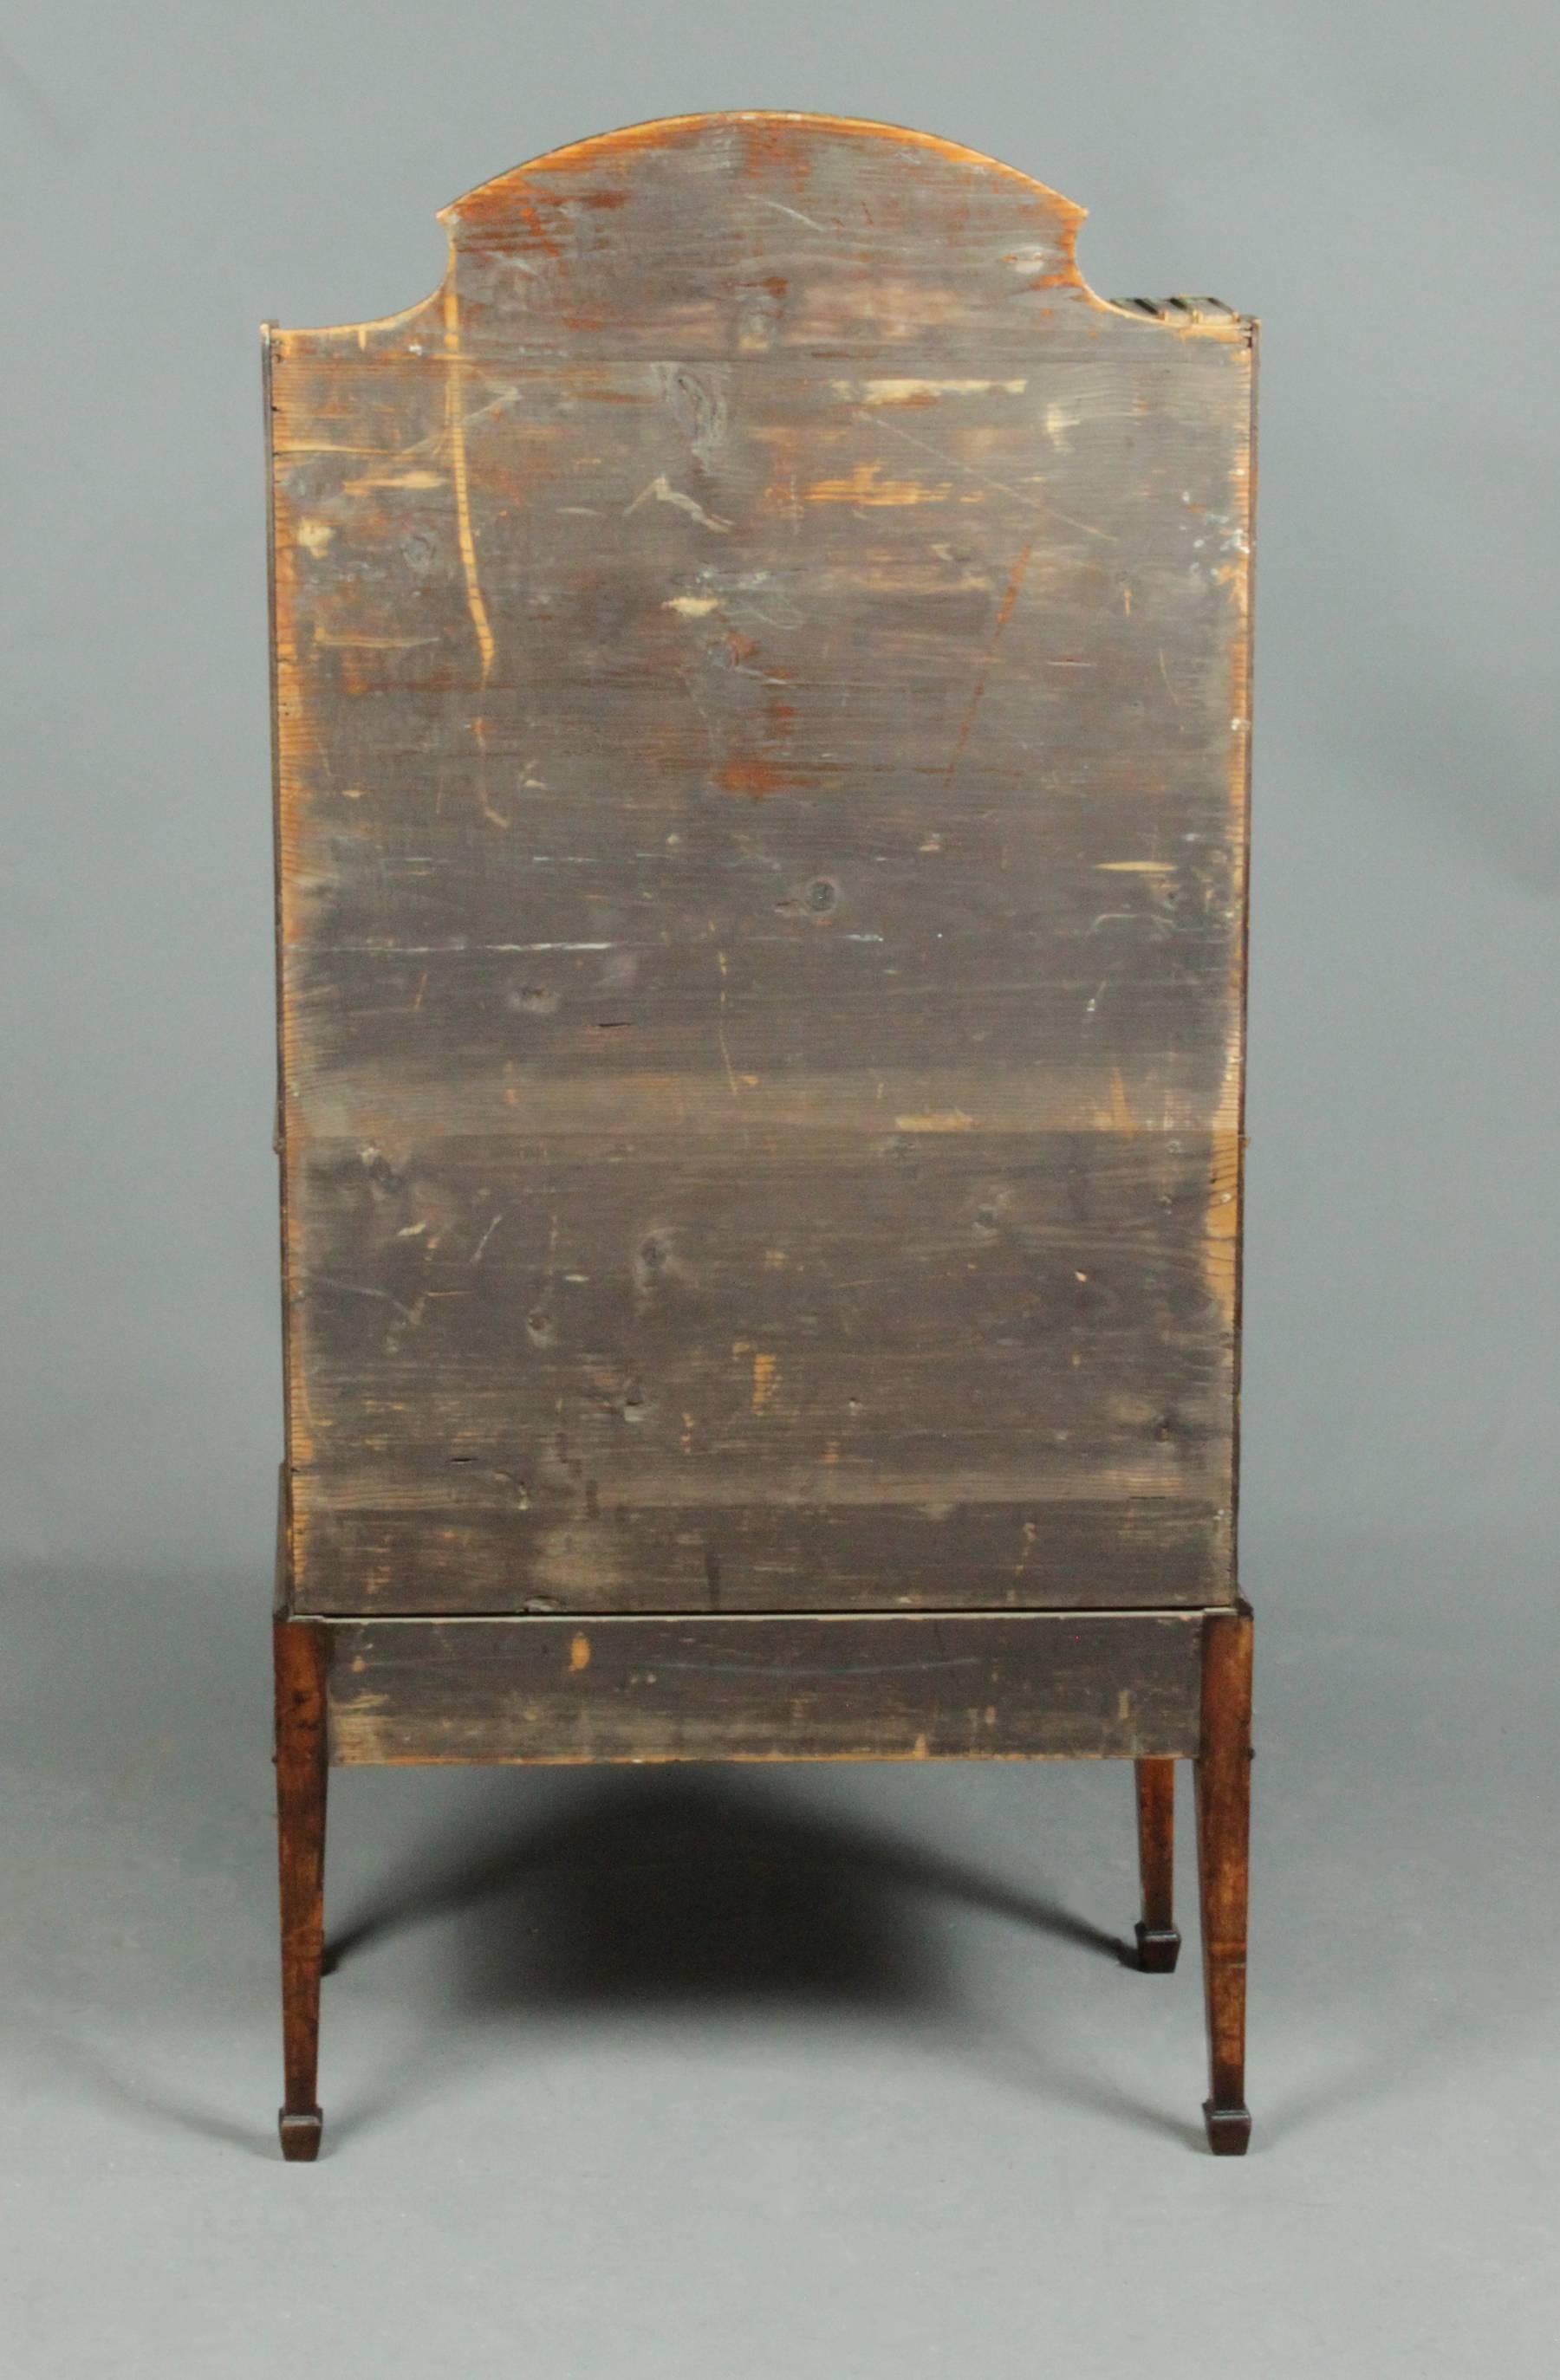 George III Sheraton Period Antique Satinwood Dwarf Bookcase In Good Condition For Sale In Bradford-on-Avon, Wiltshire